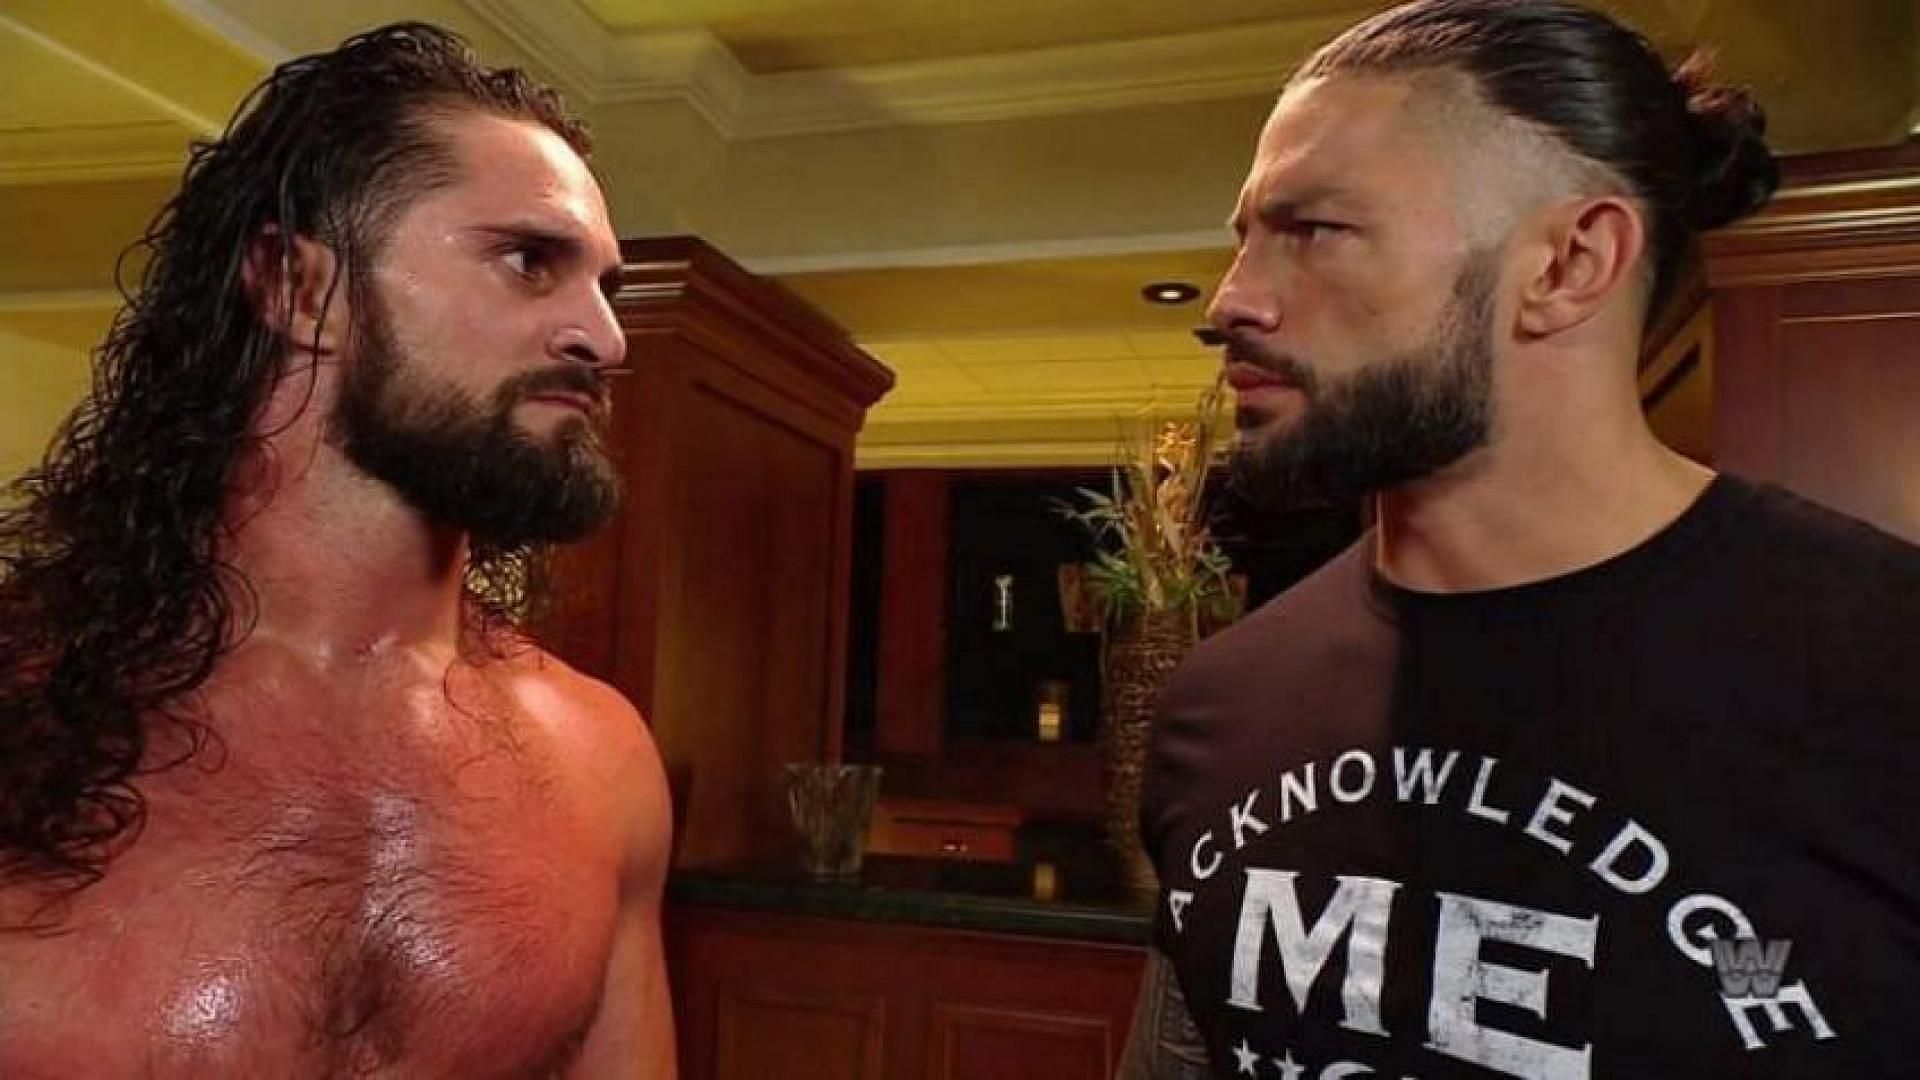 Seth Rollins must go on to defeat Roman Reigns at WWE Royal Rumble